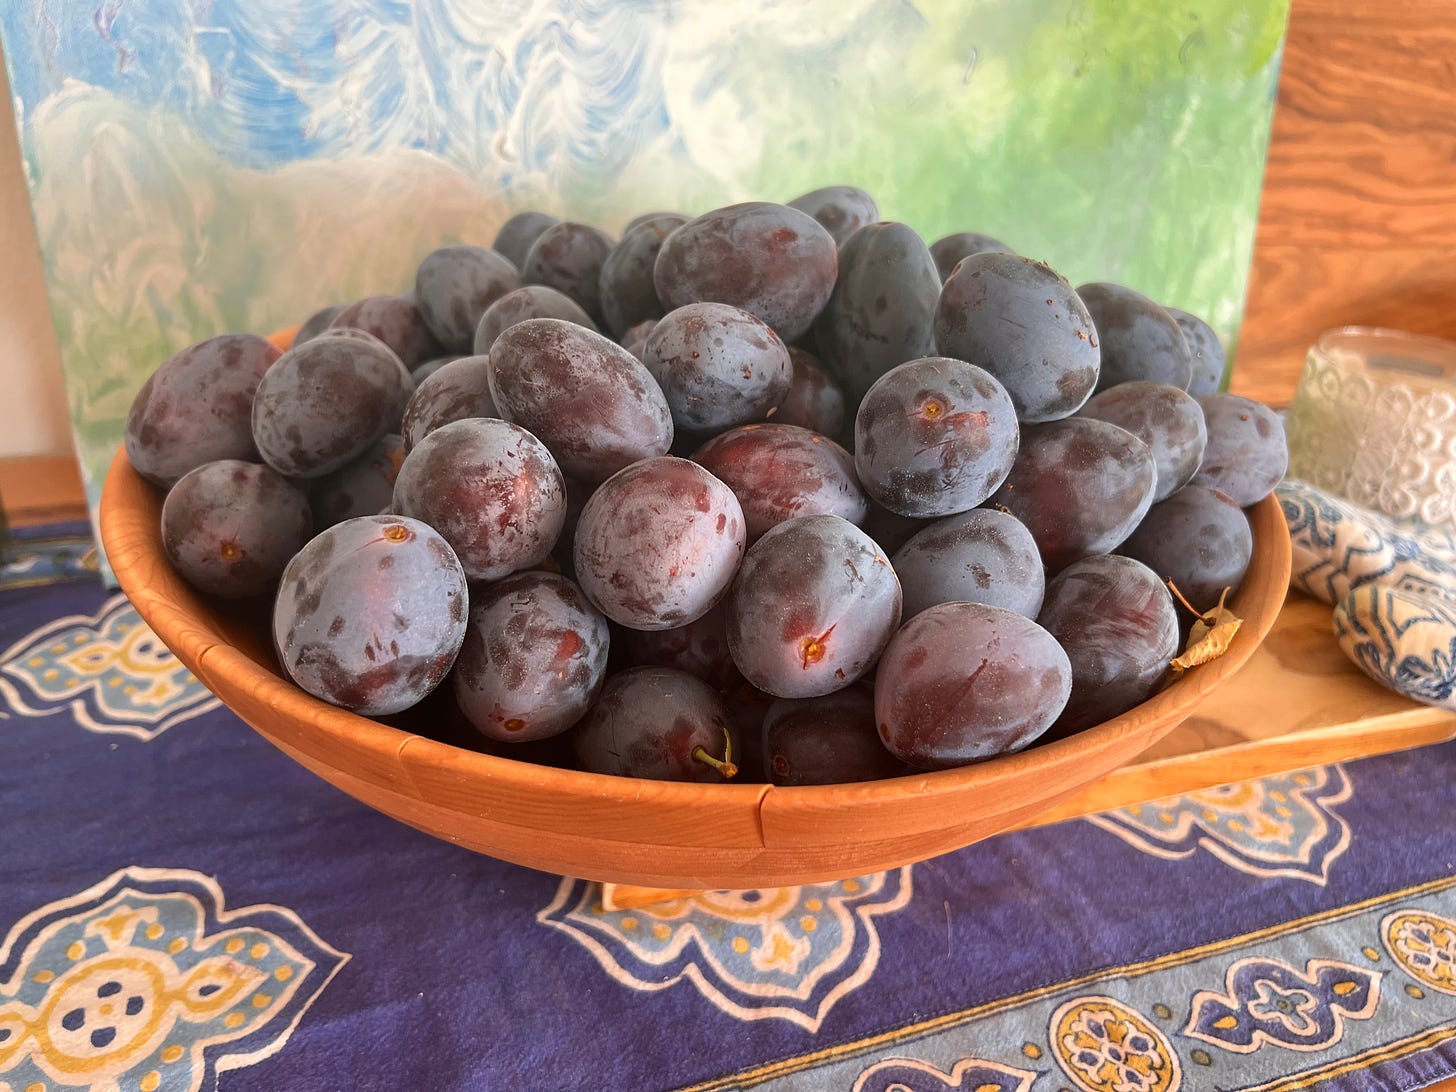 A wooden bowl of three dozen purple plums on a blue table cloth.